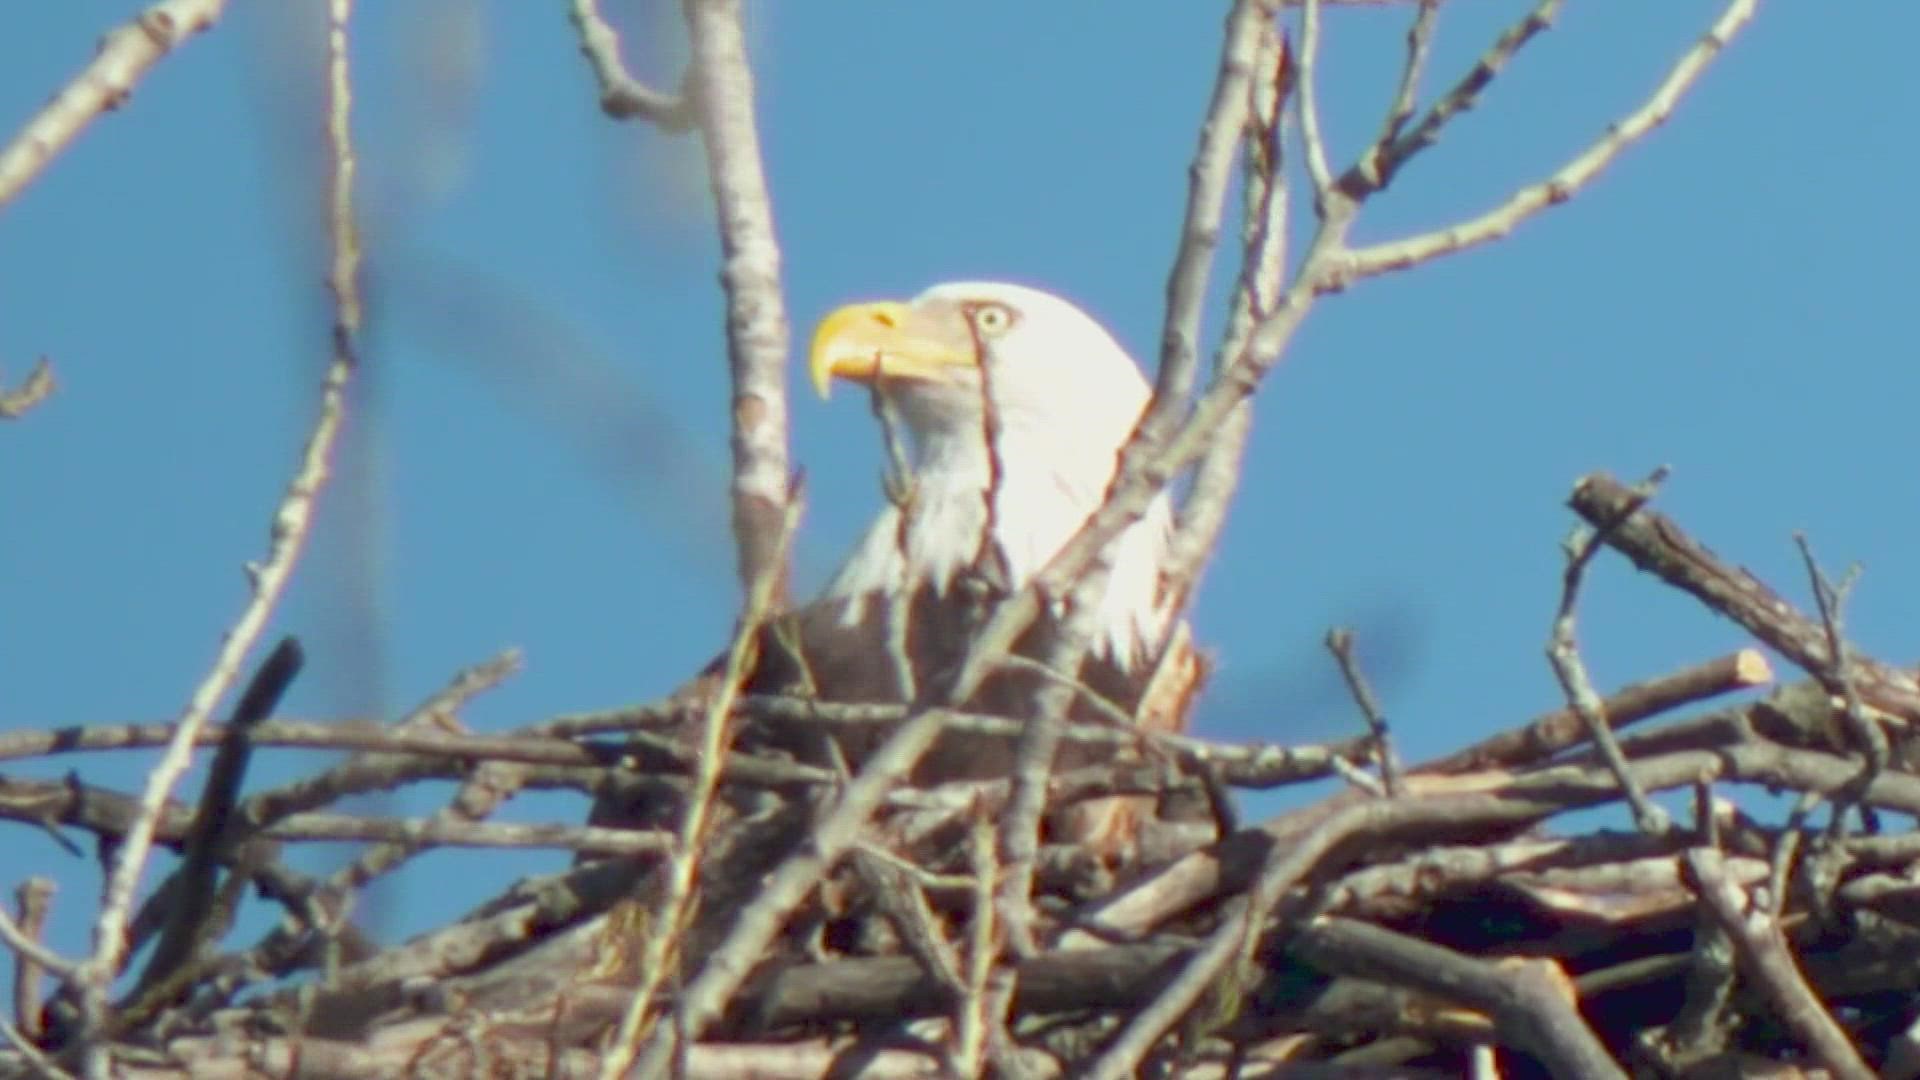 The eagles have been spotted near the lake since late 2020, and their nest is in a pretty busy part of the area.